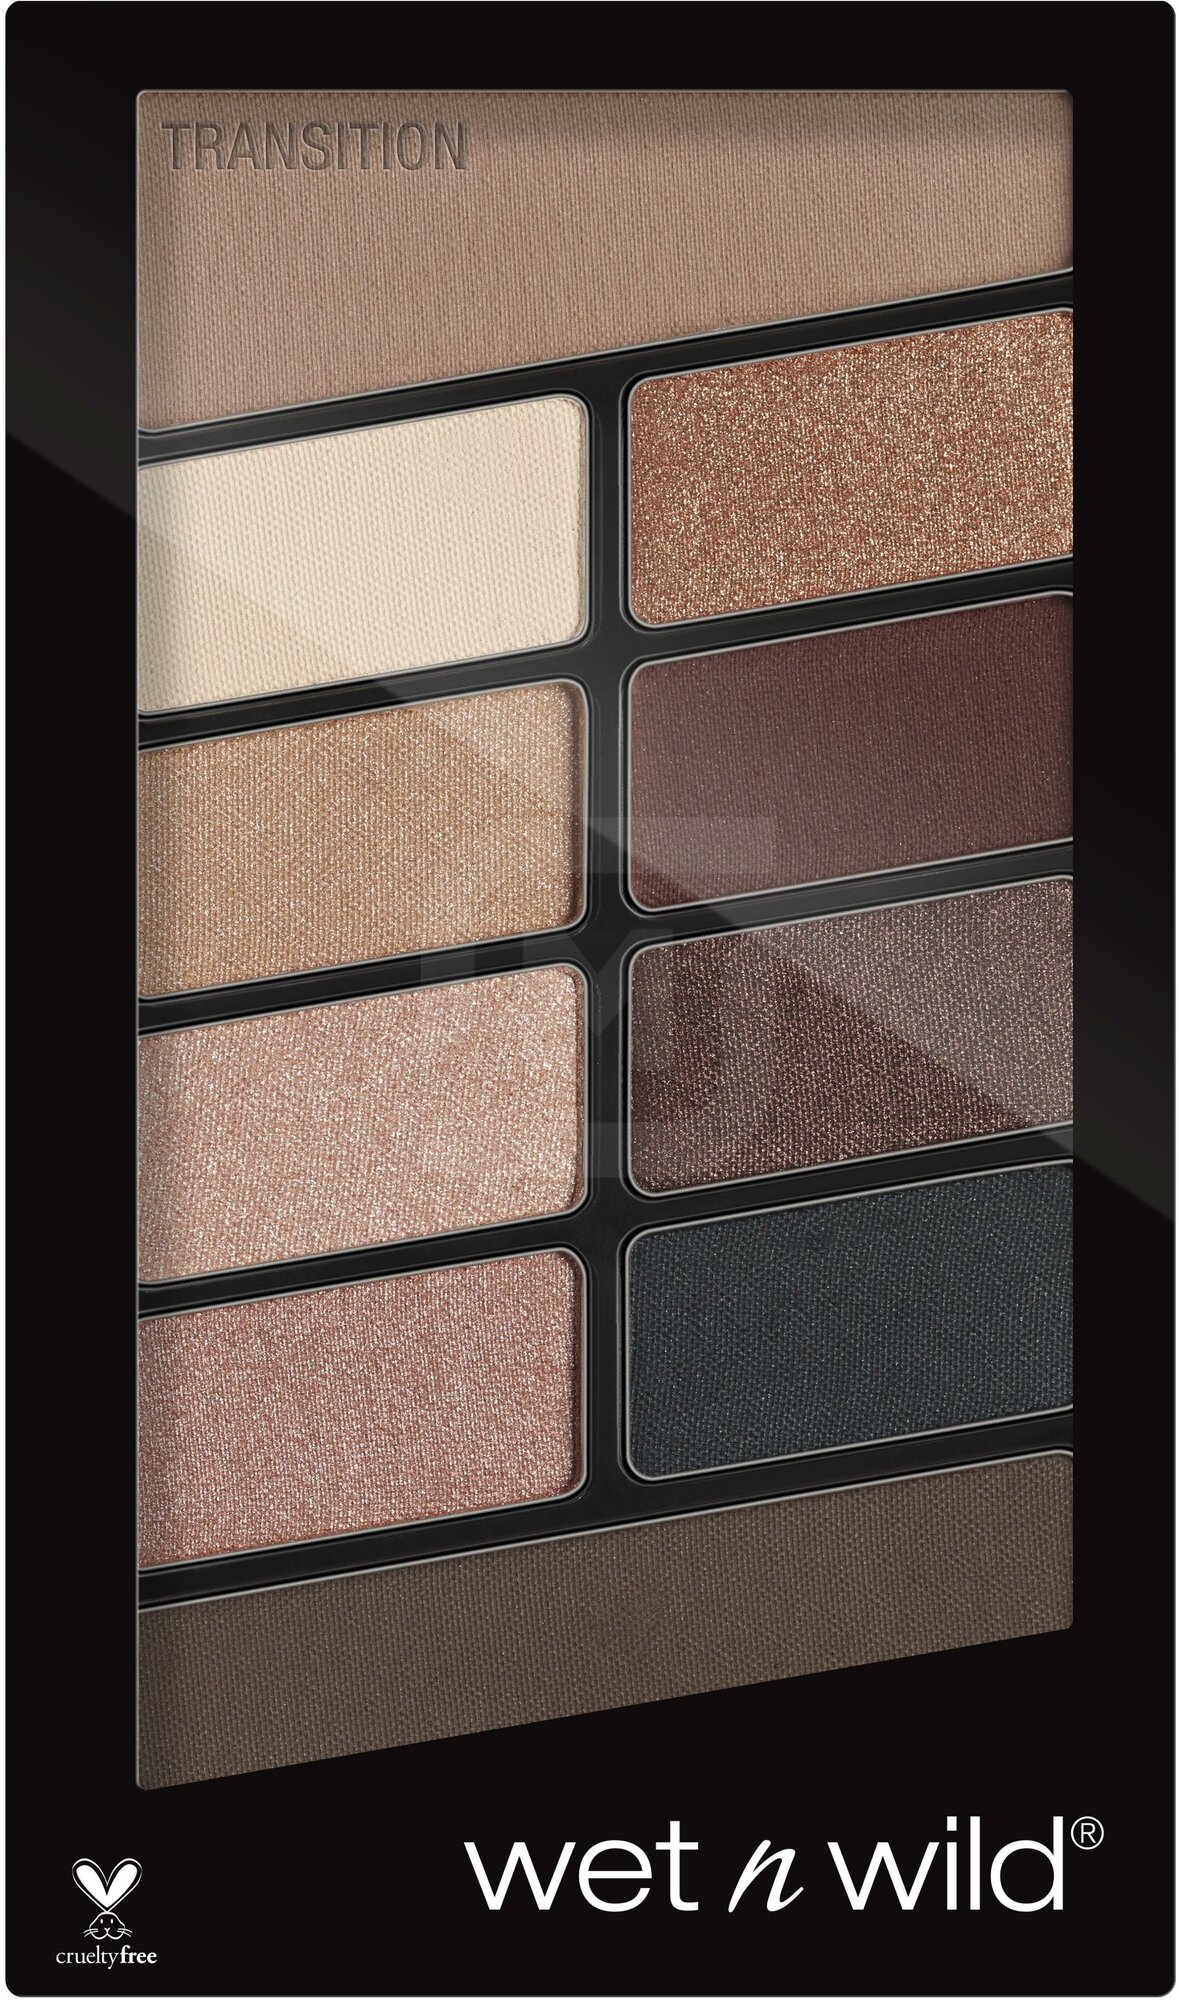 Wet n Wild Палетка Теней Для Век Color Icon 10-Pan Palette (10 Оттенков) Товар Stop playing safe Markwins Beauty Products CN - фото №13